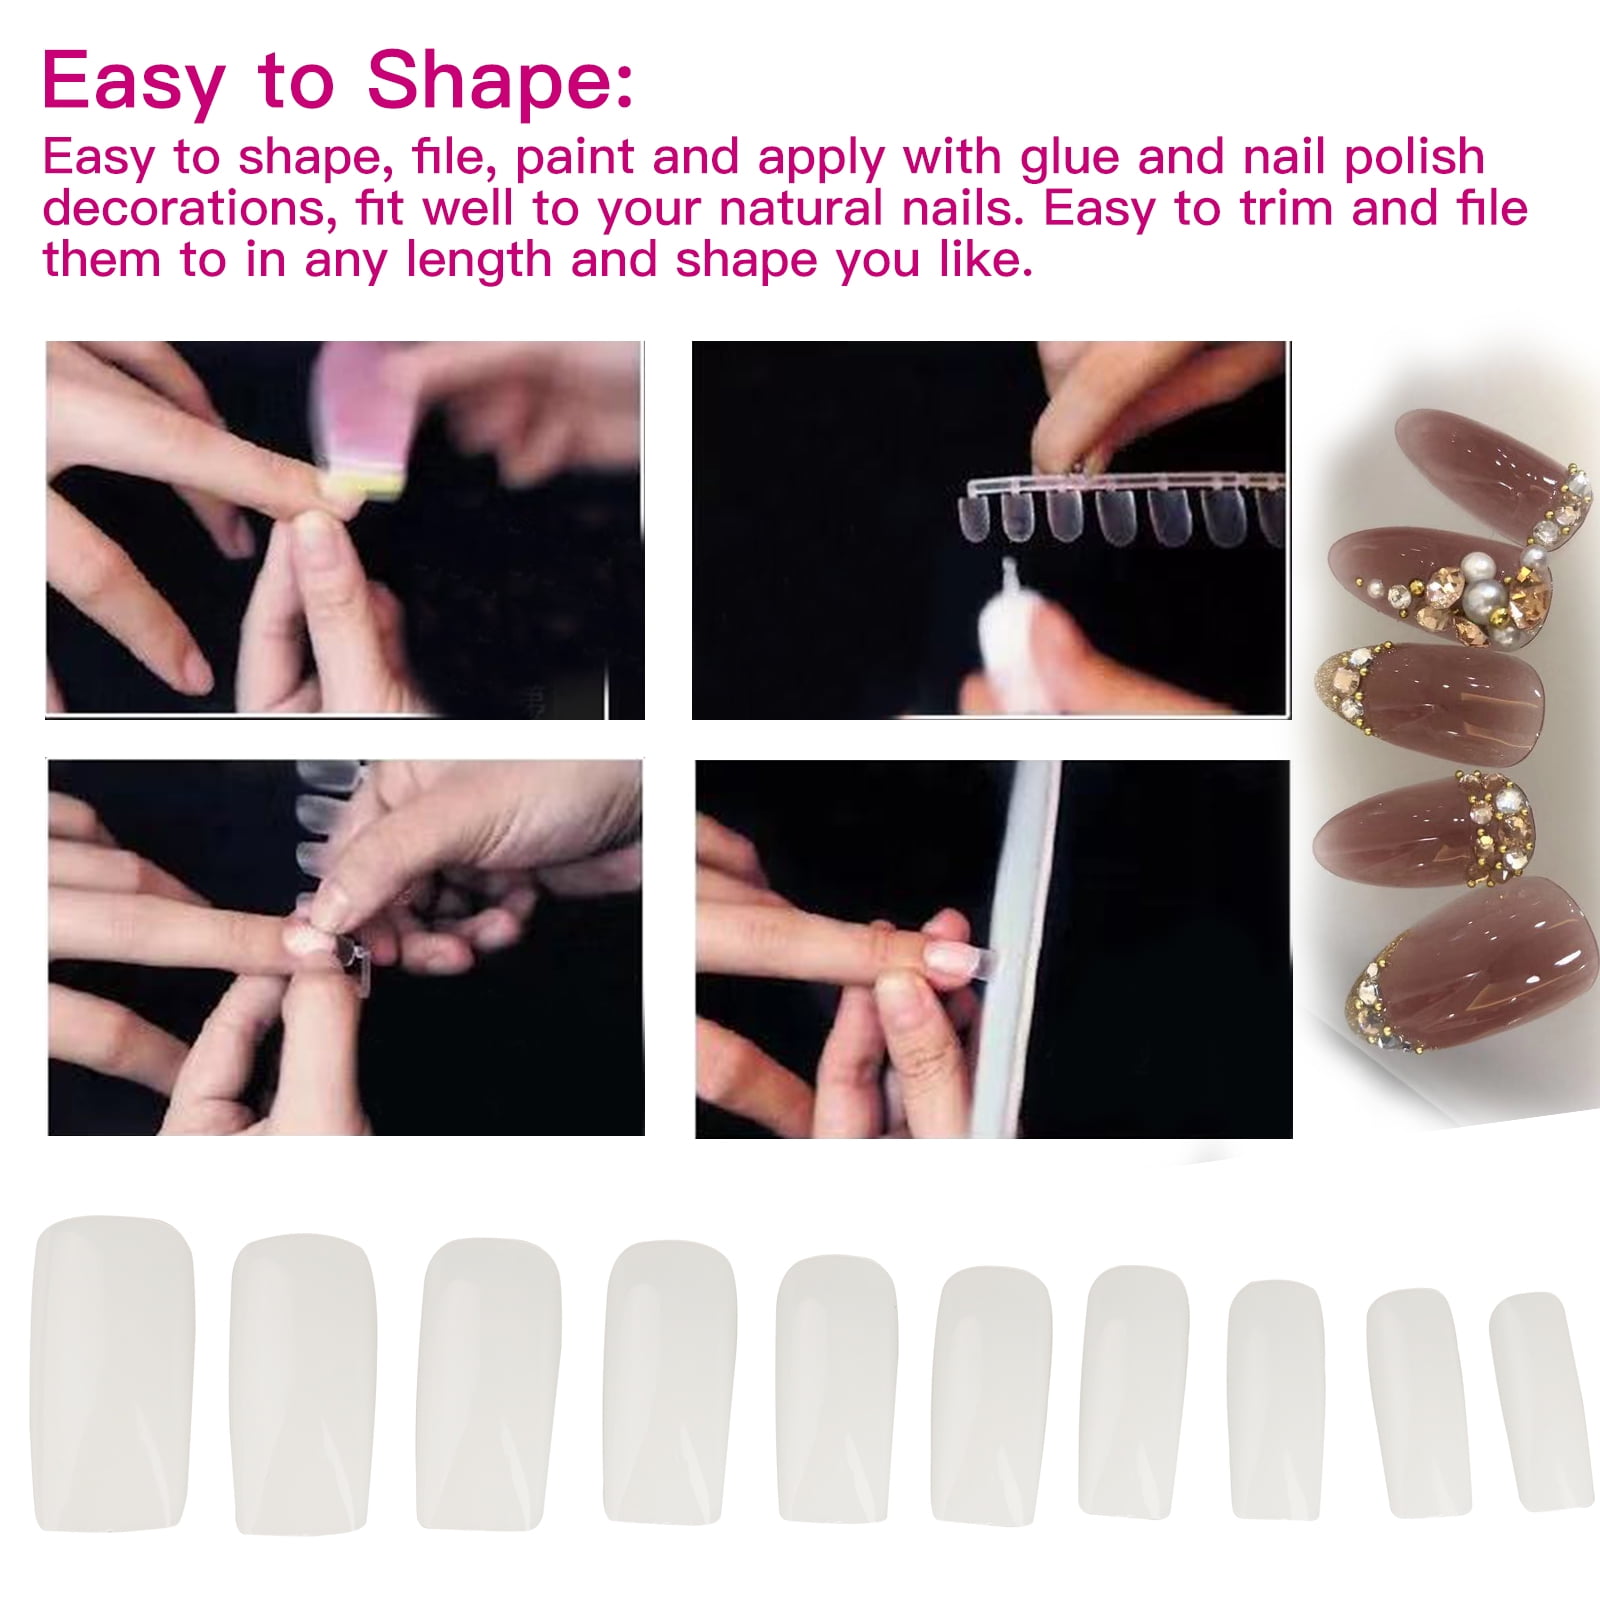 35 Square Nail Designs to Try Now